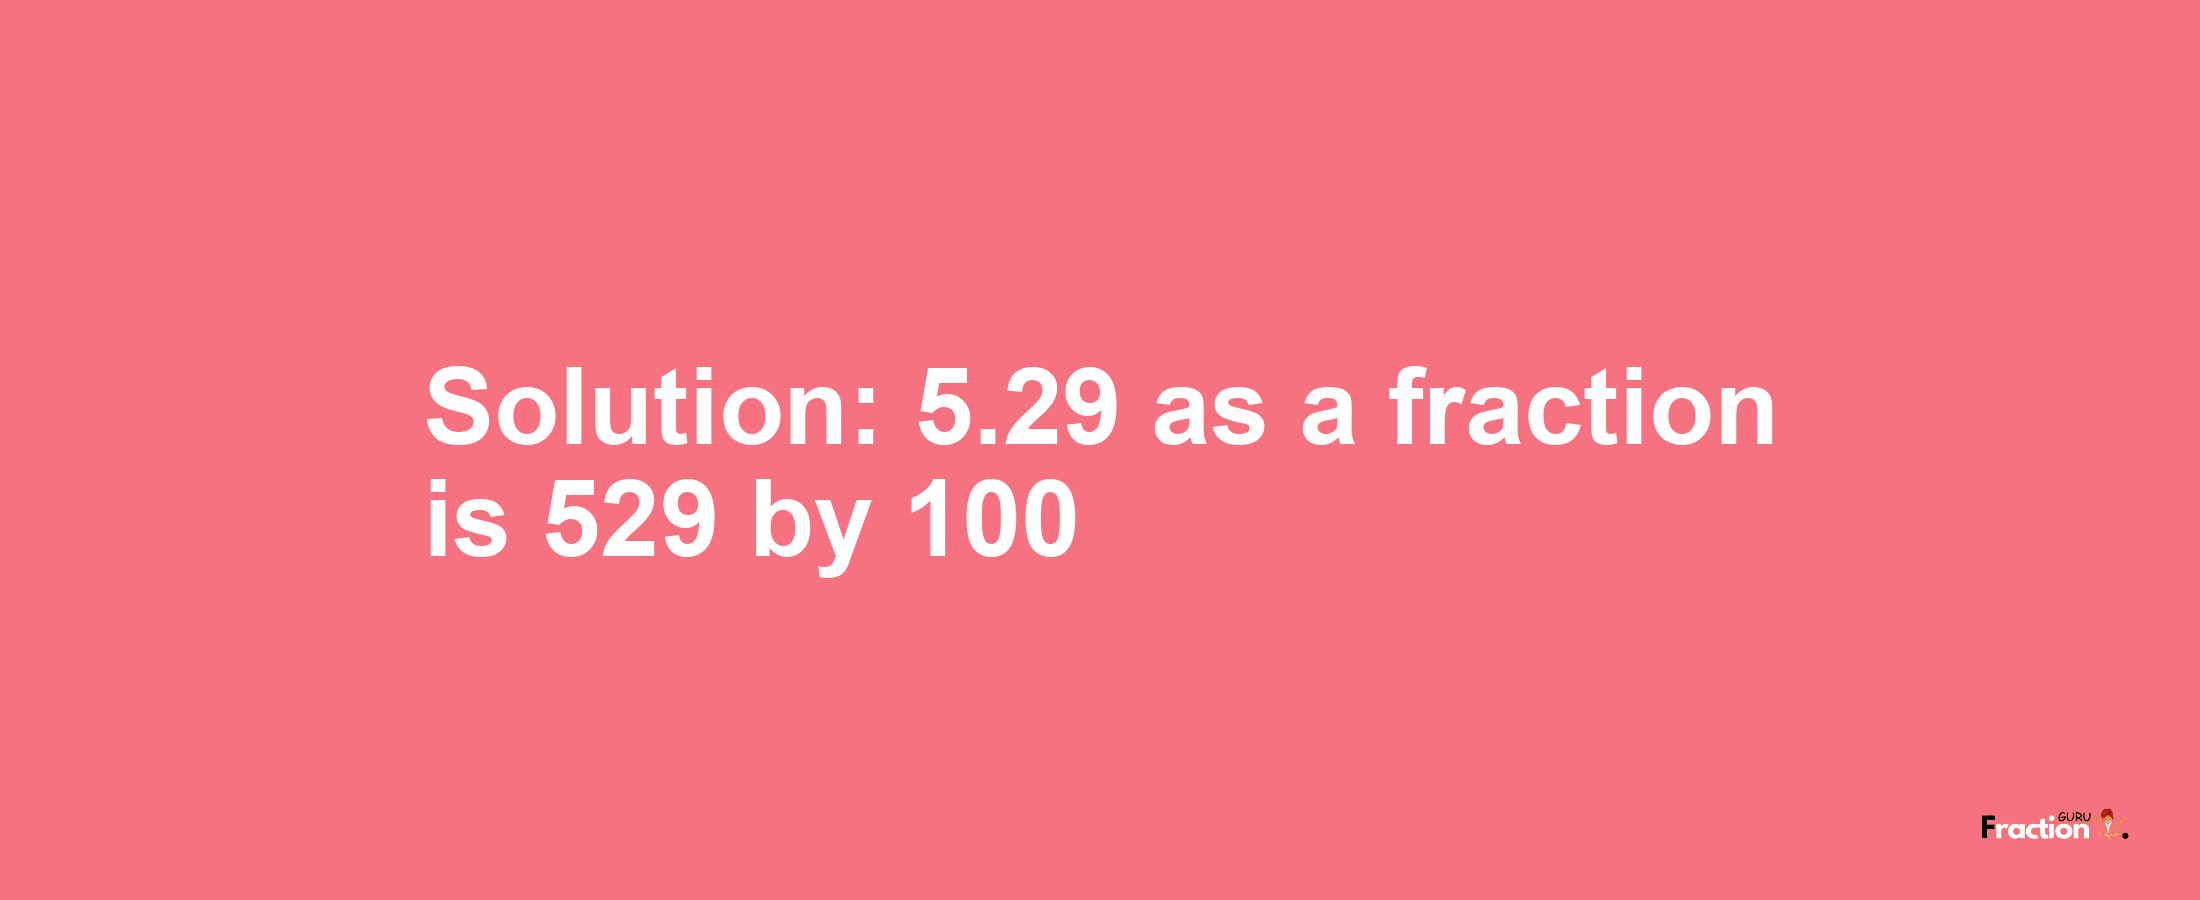 Solution:5.29 as a fraction is 529/100